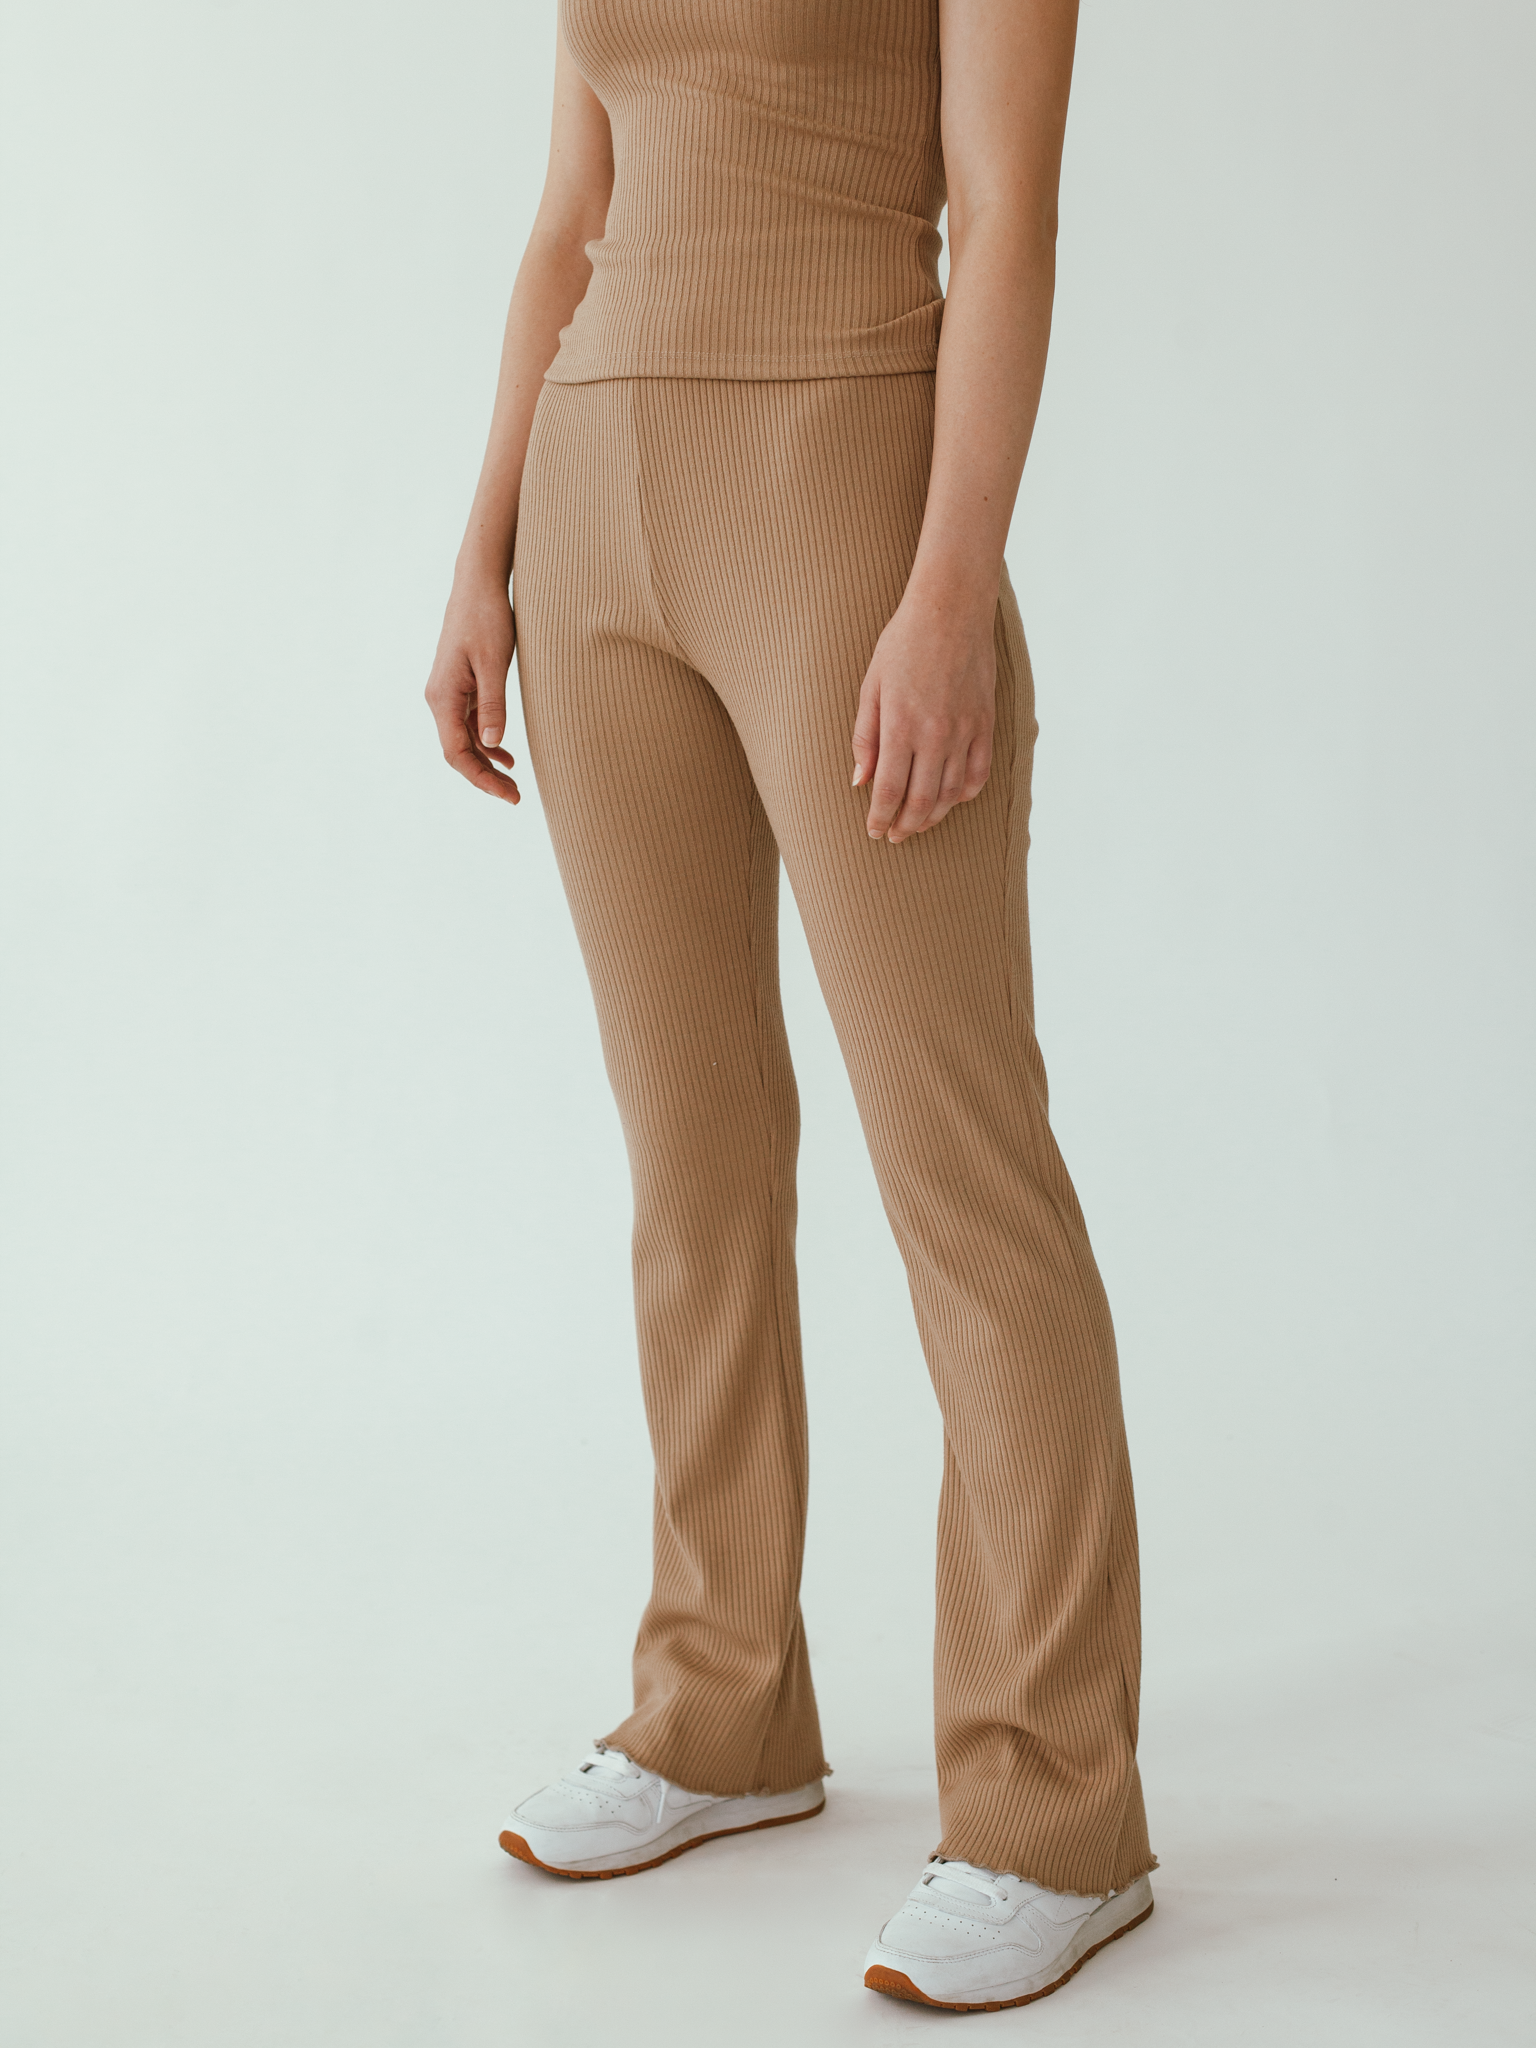 Ribbed Knit Pants in Camel